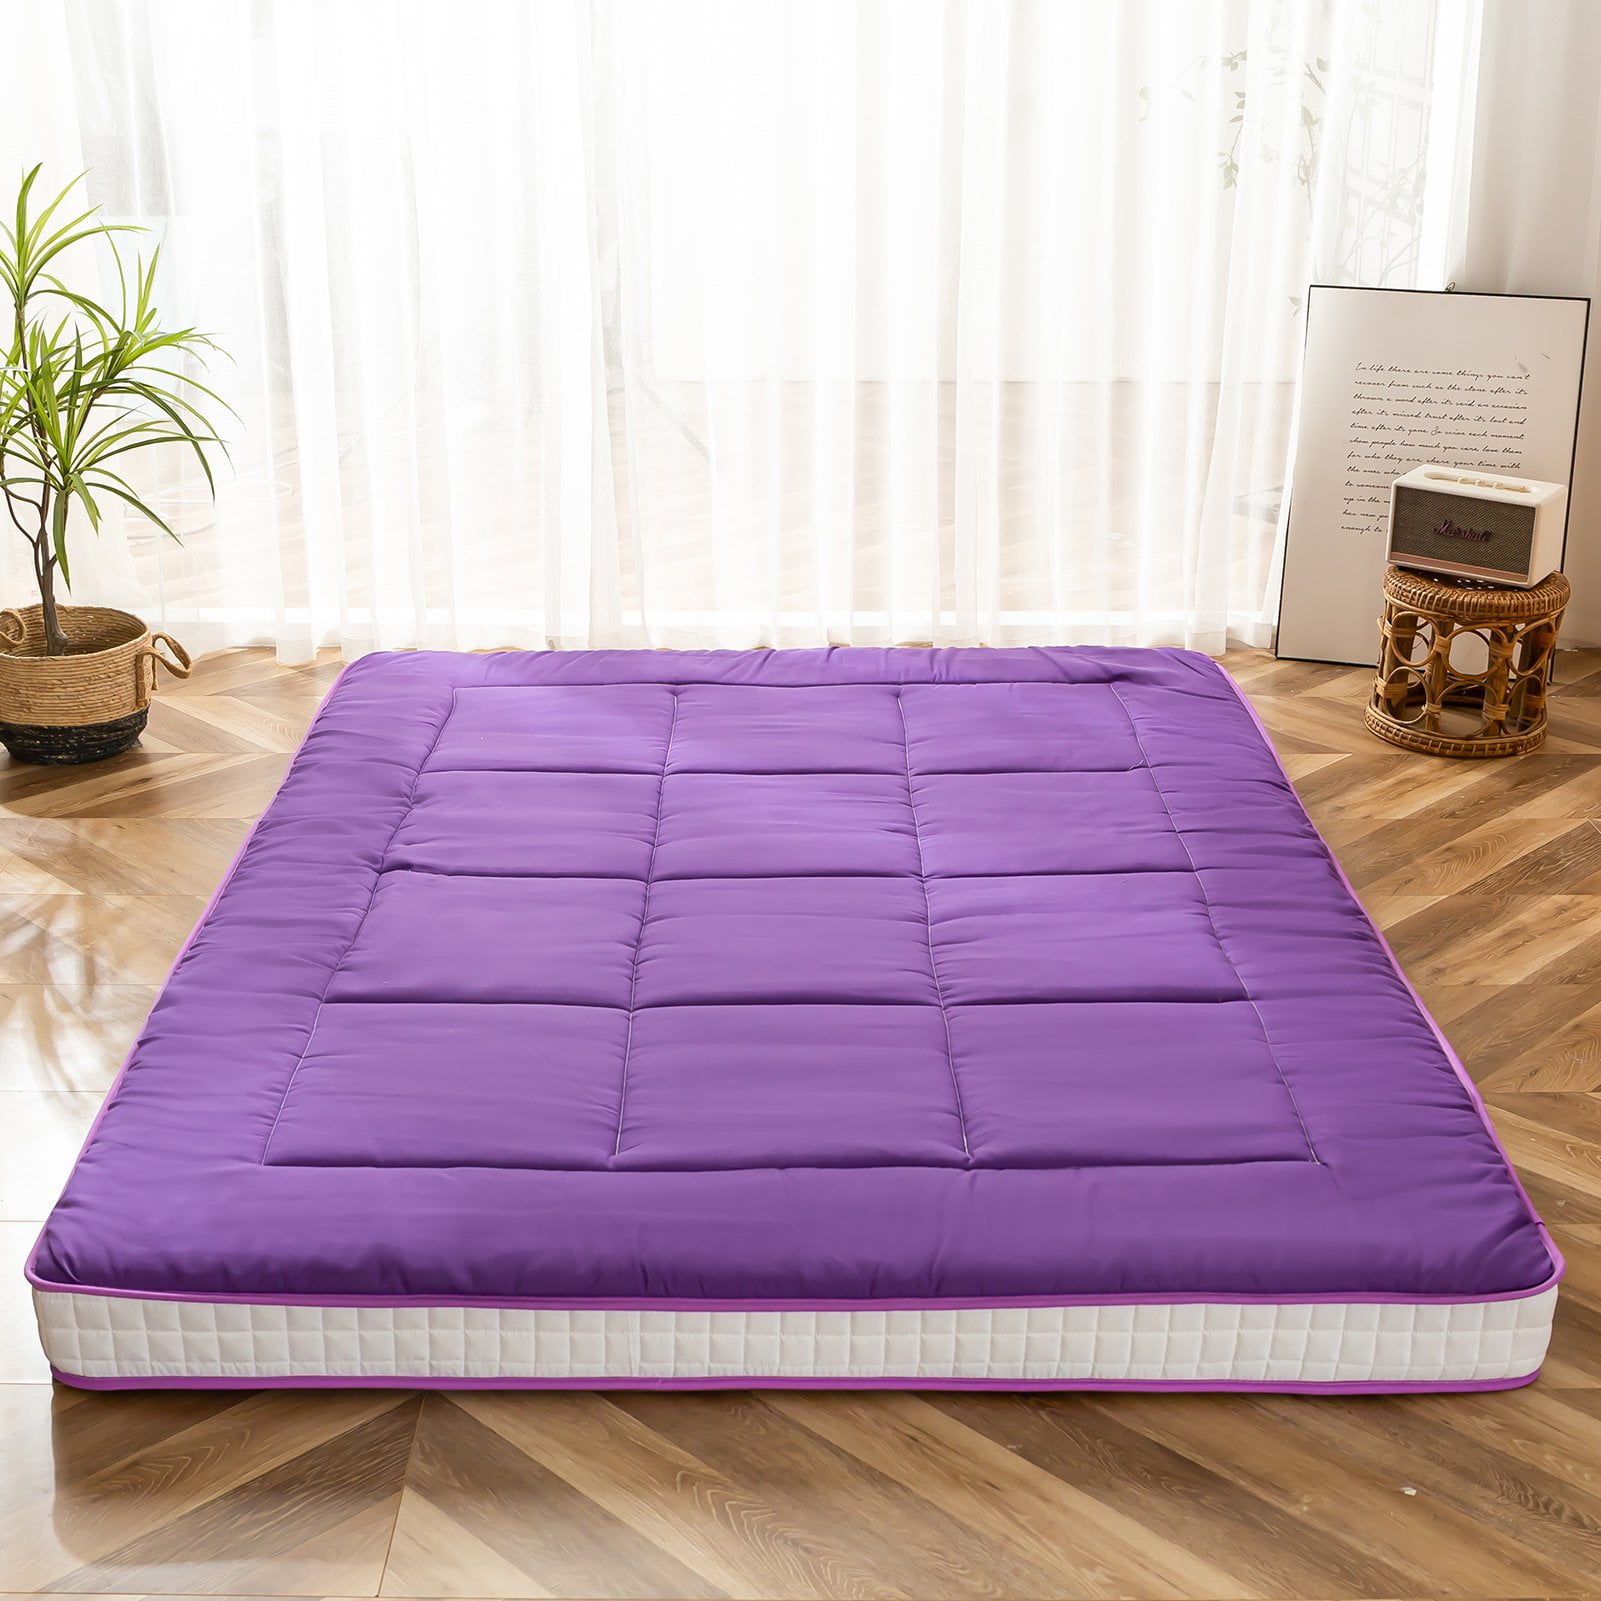 Futon Mattress 4-5cm Thick Foldable Tatami Floor Mattress Topper Non-slip Quilted Fitted Student Dormitory Sleeping Pad Double Single Mattress,C,120x200cm 47x79 